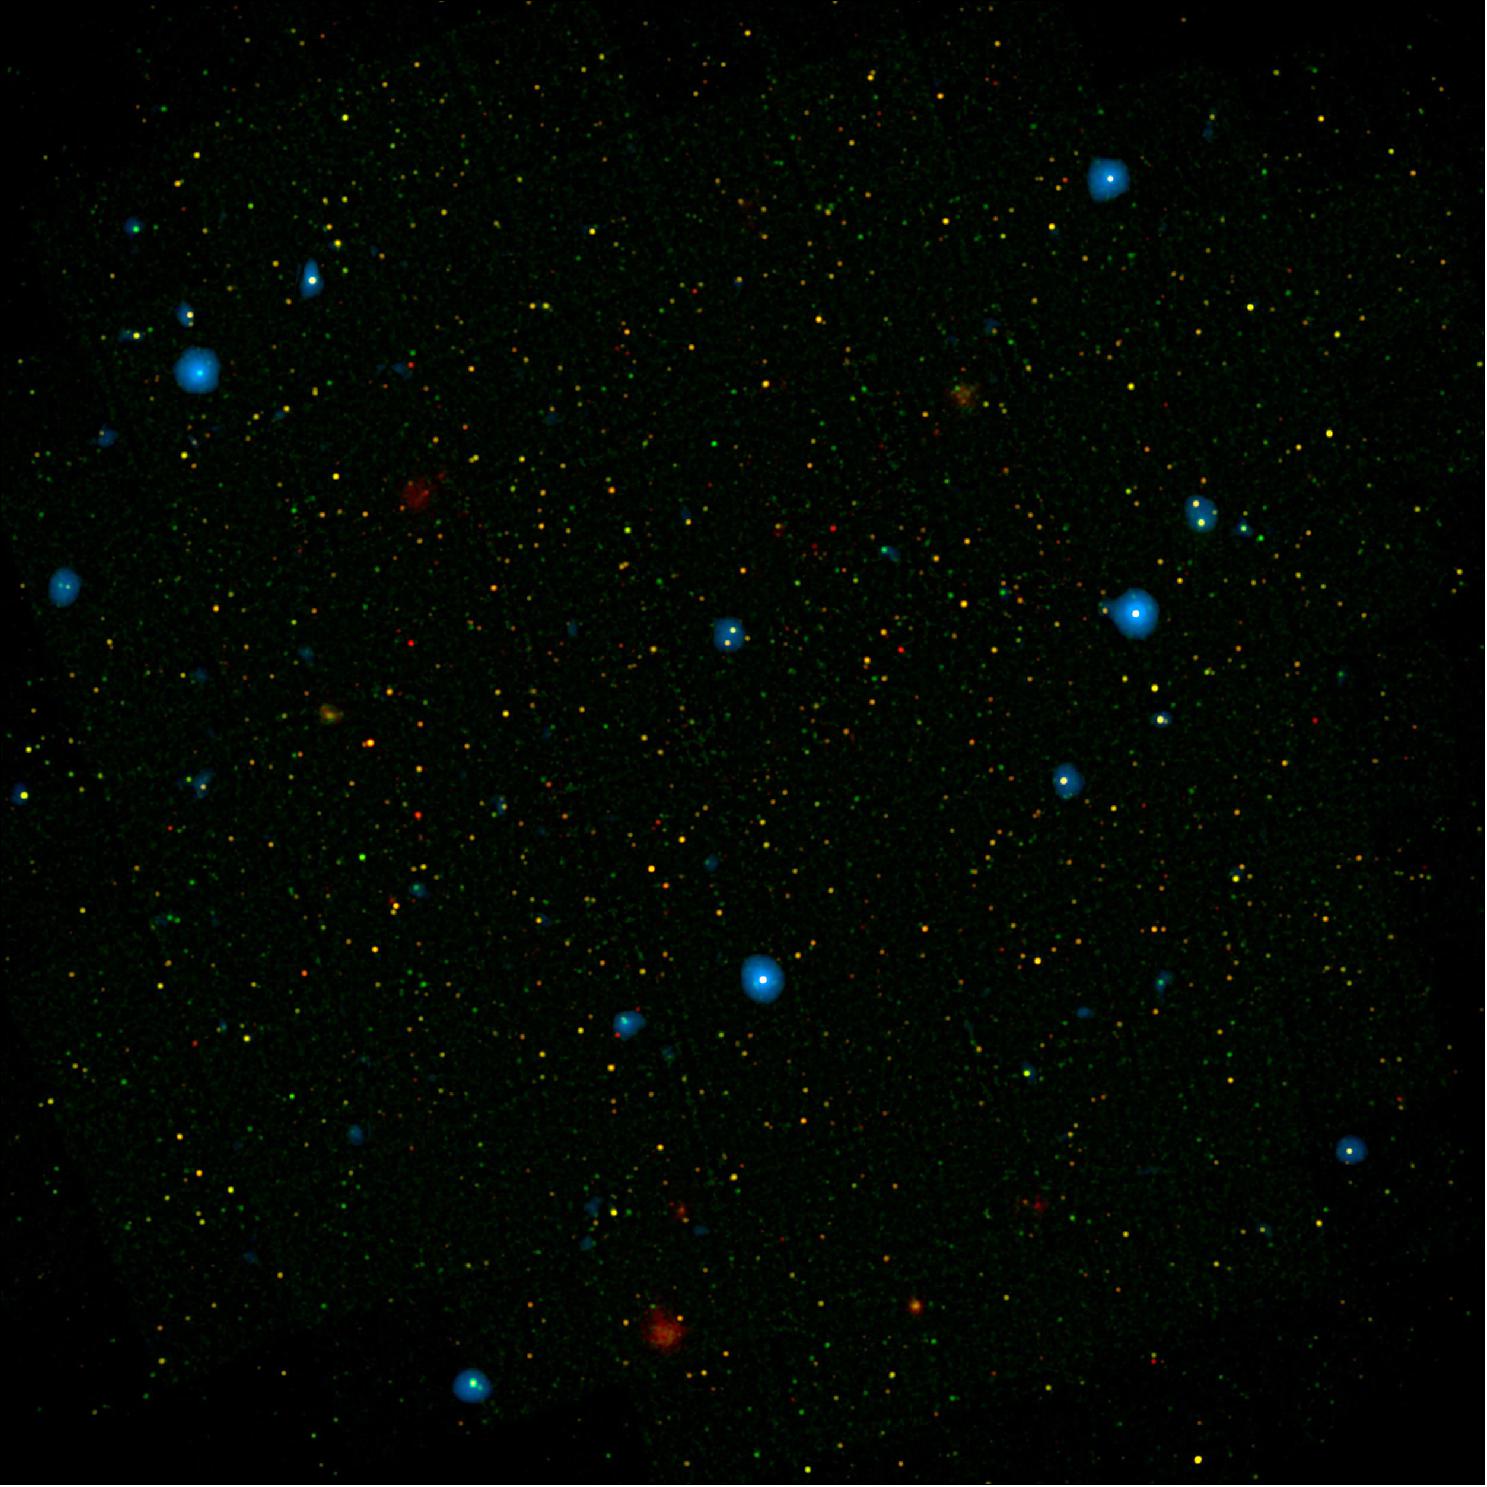 Figure 32: The blue dots in this field of galaxies, known as the COSMOS field, show galaxies that contain supermassive black holes emitting high-energy X-rays. The black holes were detected by NASA's NuSTAR, which spotted 32 such black holes in this field and has observed hundreds across the whole sky so far.